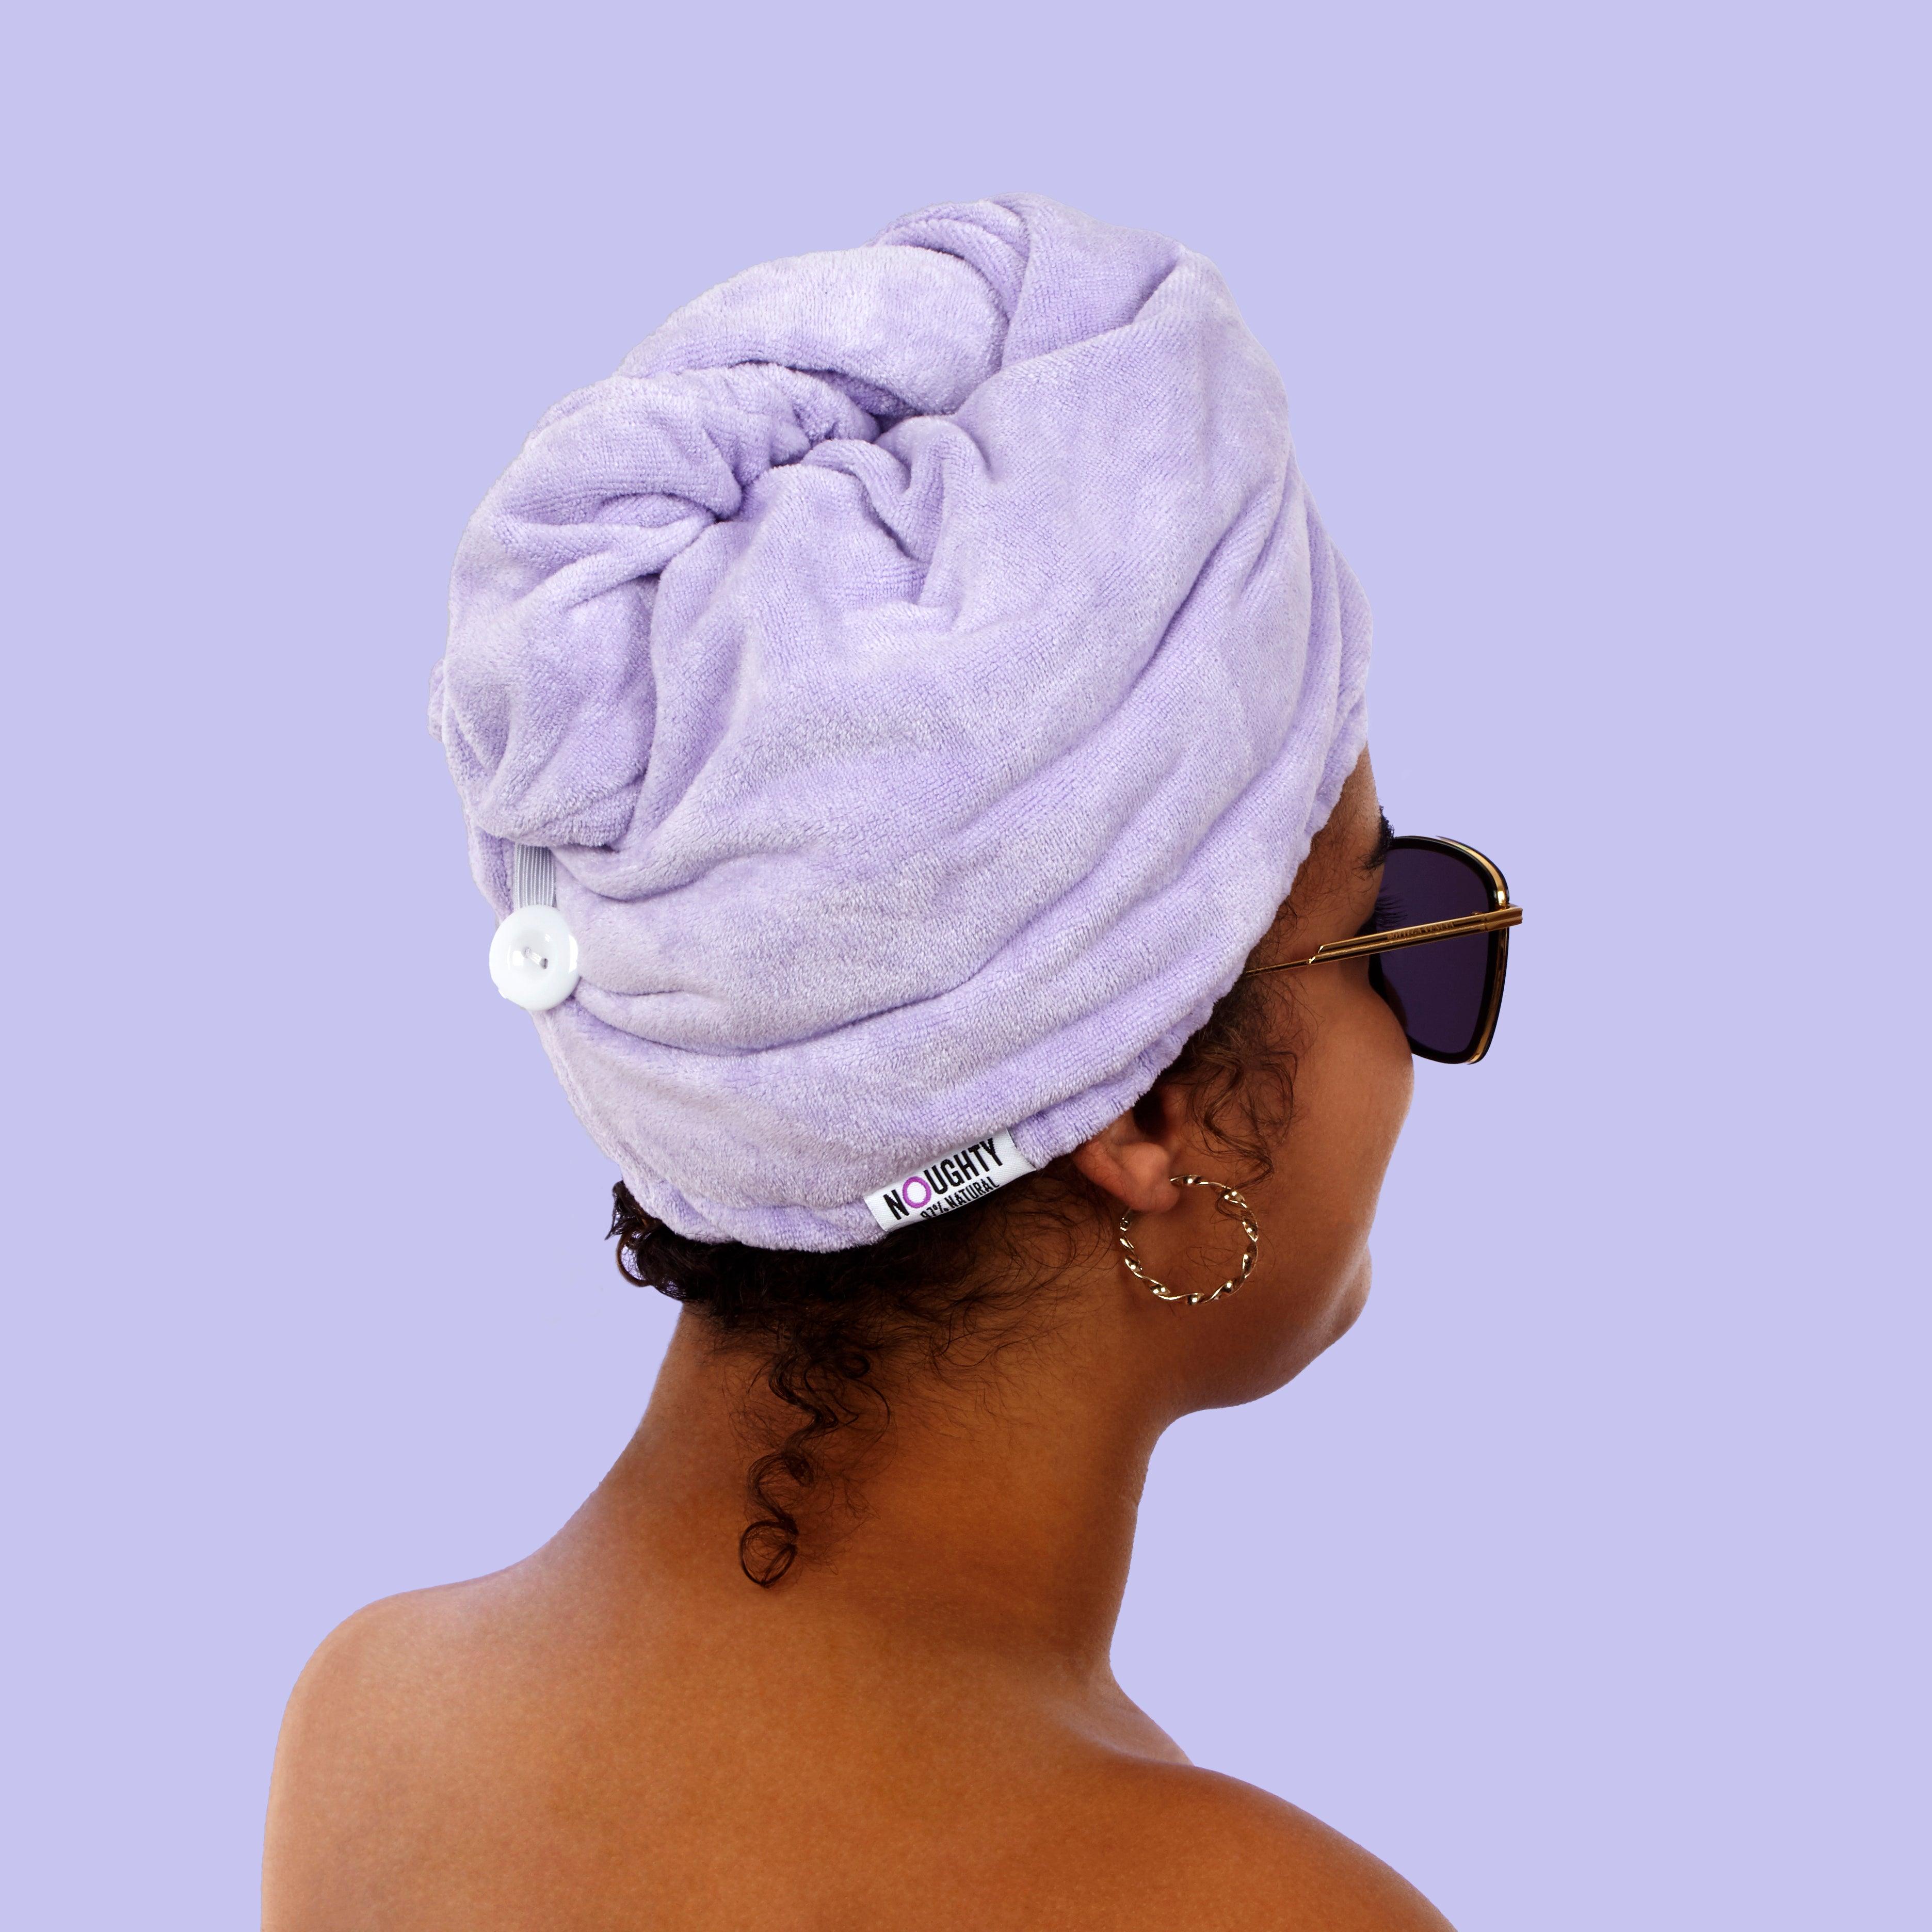 Microfiber Hair Towel Wraps - A Thrifty Mom - Recipes, Crafts, DIY and more